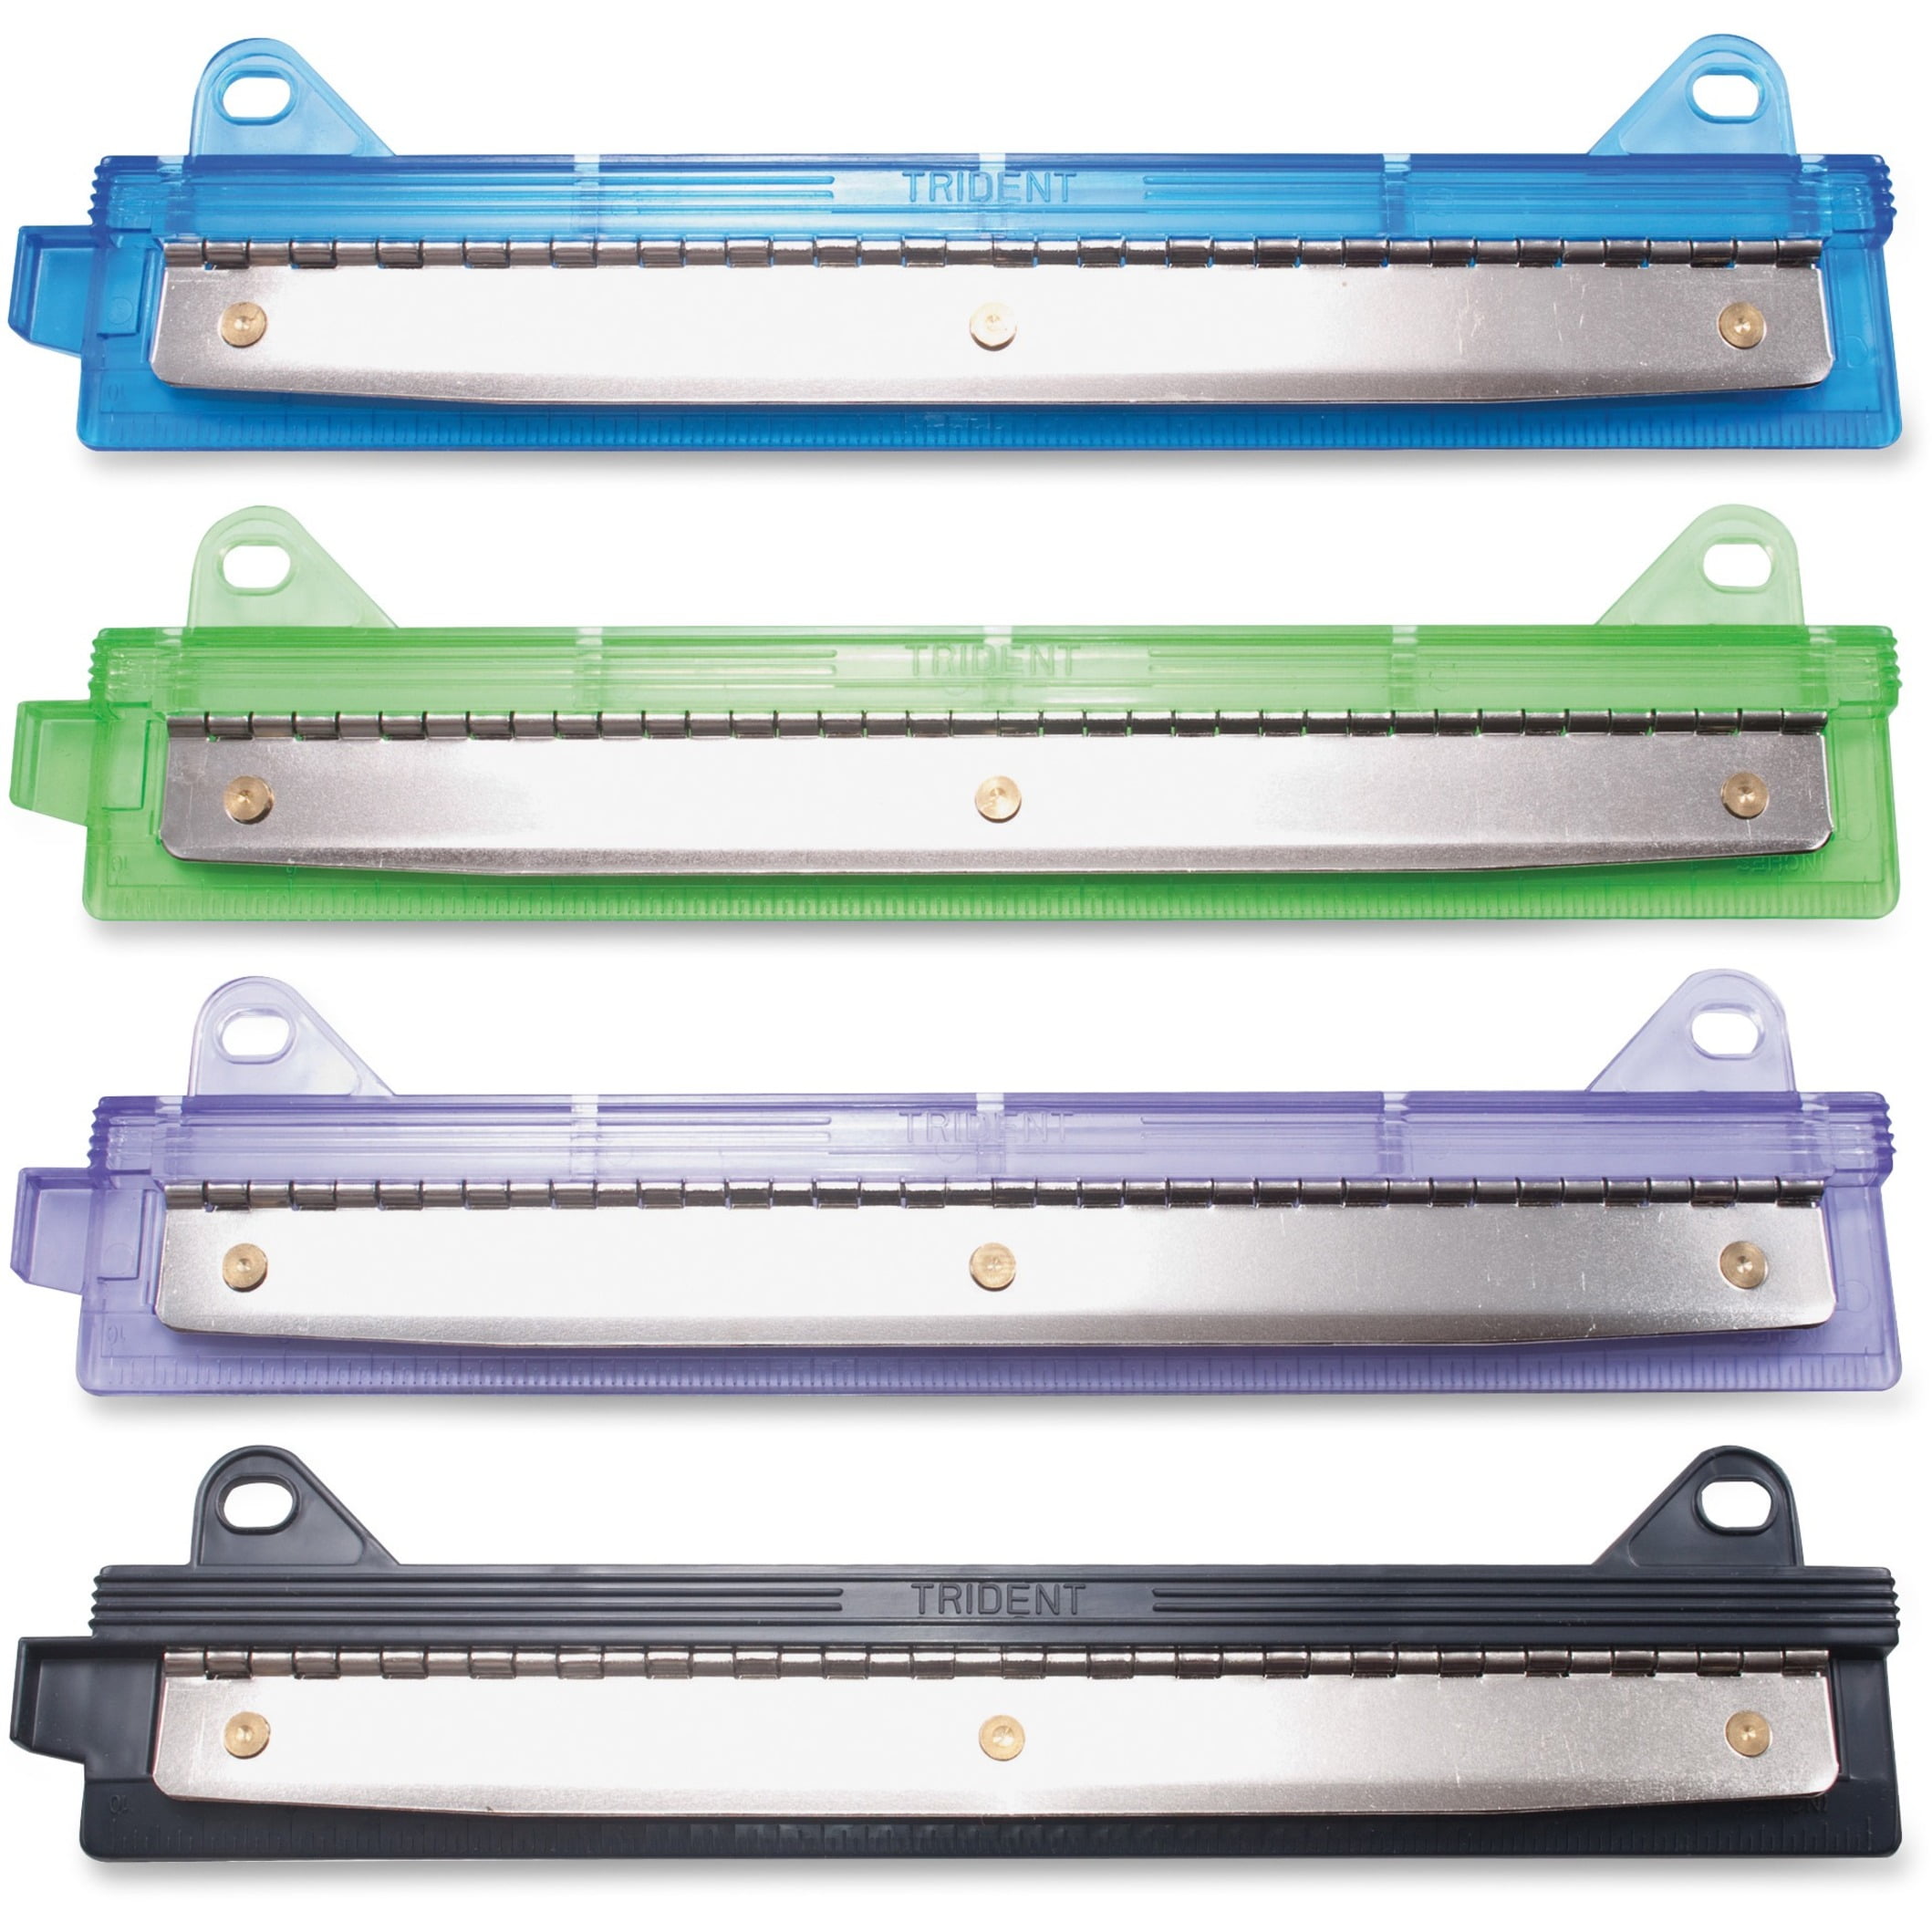 Set of 1 - Colored Paper Hole Punch 3-Hole Paper (4 Count) Punch 8.5x11 Copy Paper Punch Copy Paper Punch for Binders Assorted Colors